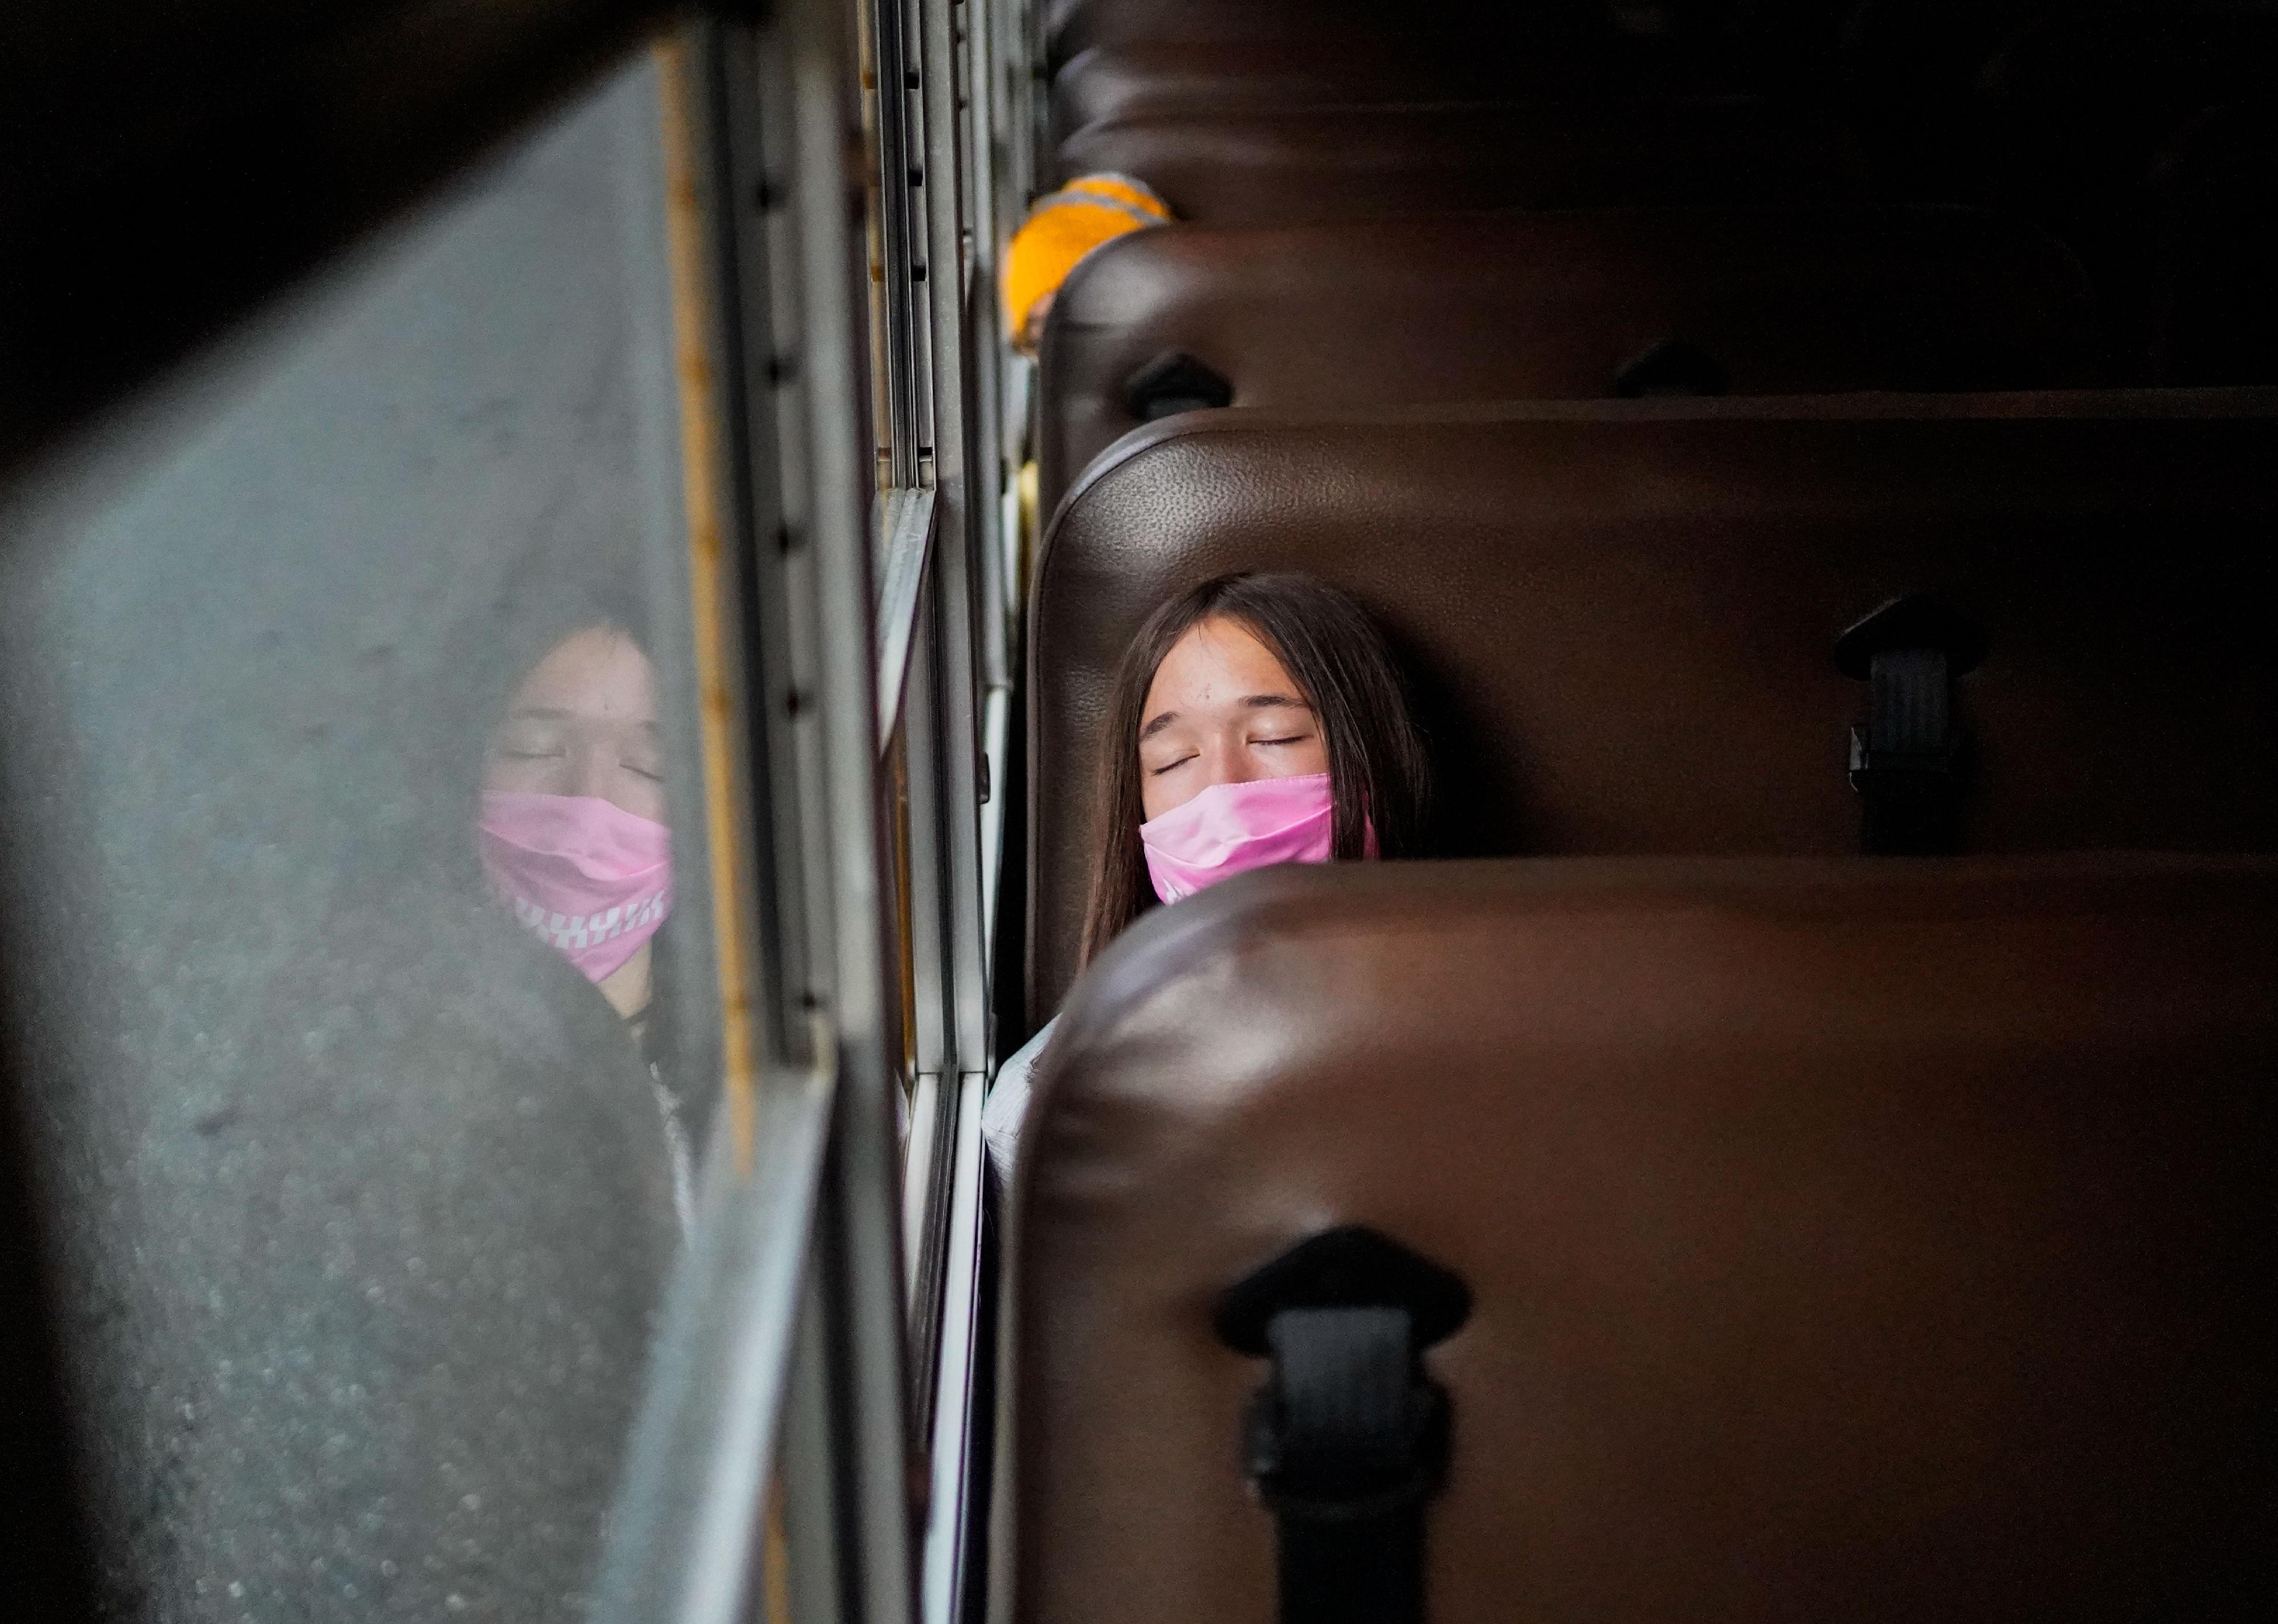 A teen riding the bus while resting their eyes and a wearing a pink mask.